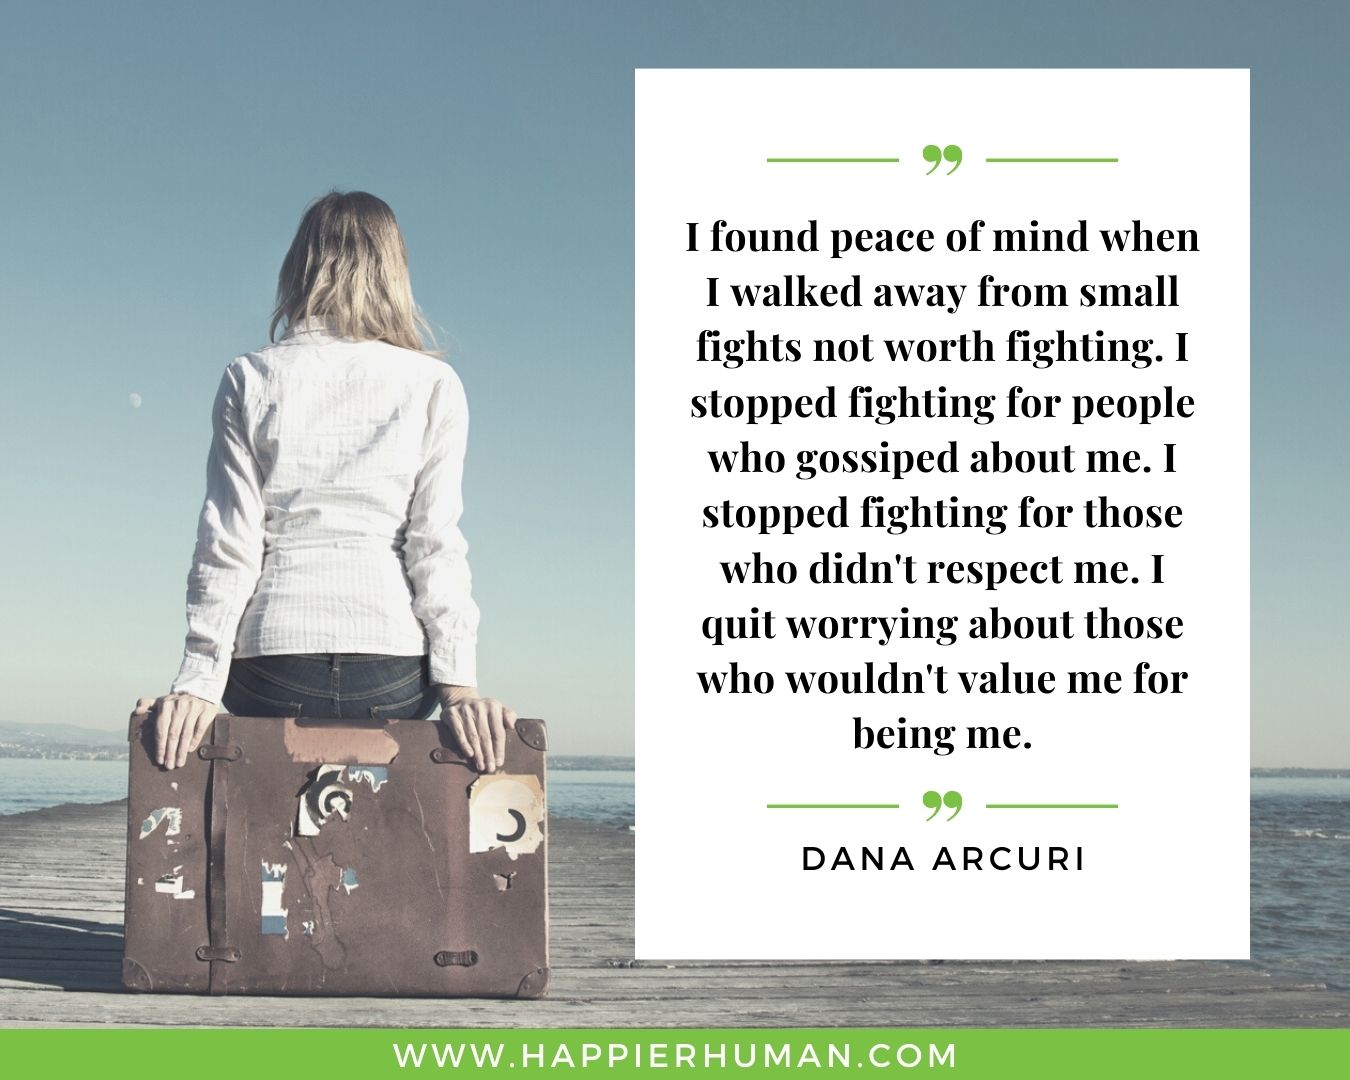 Toxic People Quotes - “I found peace of mind when I walked away from small fights not worth fighting. I stopped fighting for people who gossiped about me. I stopped fighting for those who didn't respect me. I quit worrying about those who wouldn't value me for being me.” – Dana Arcuri